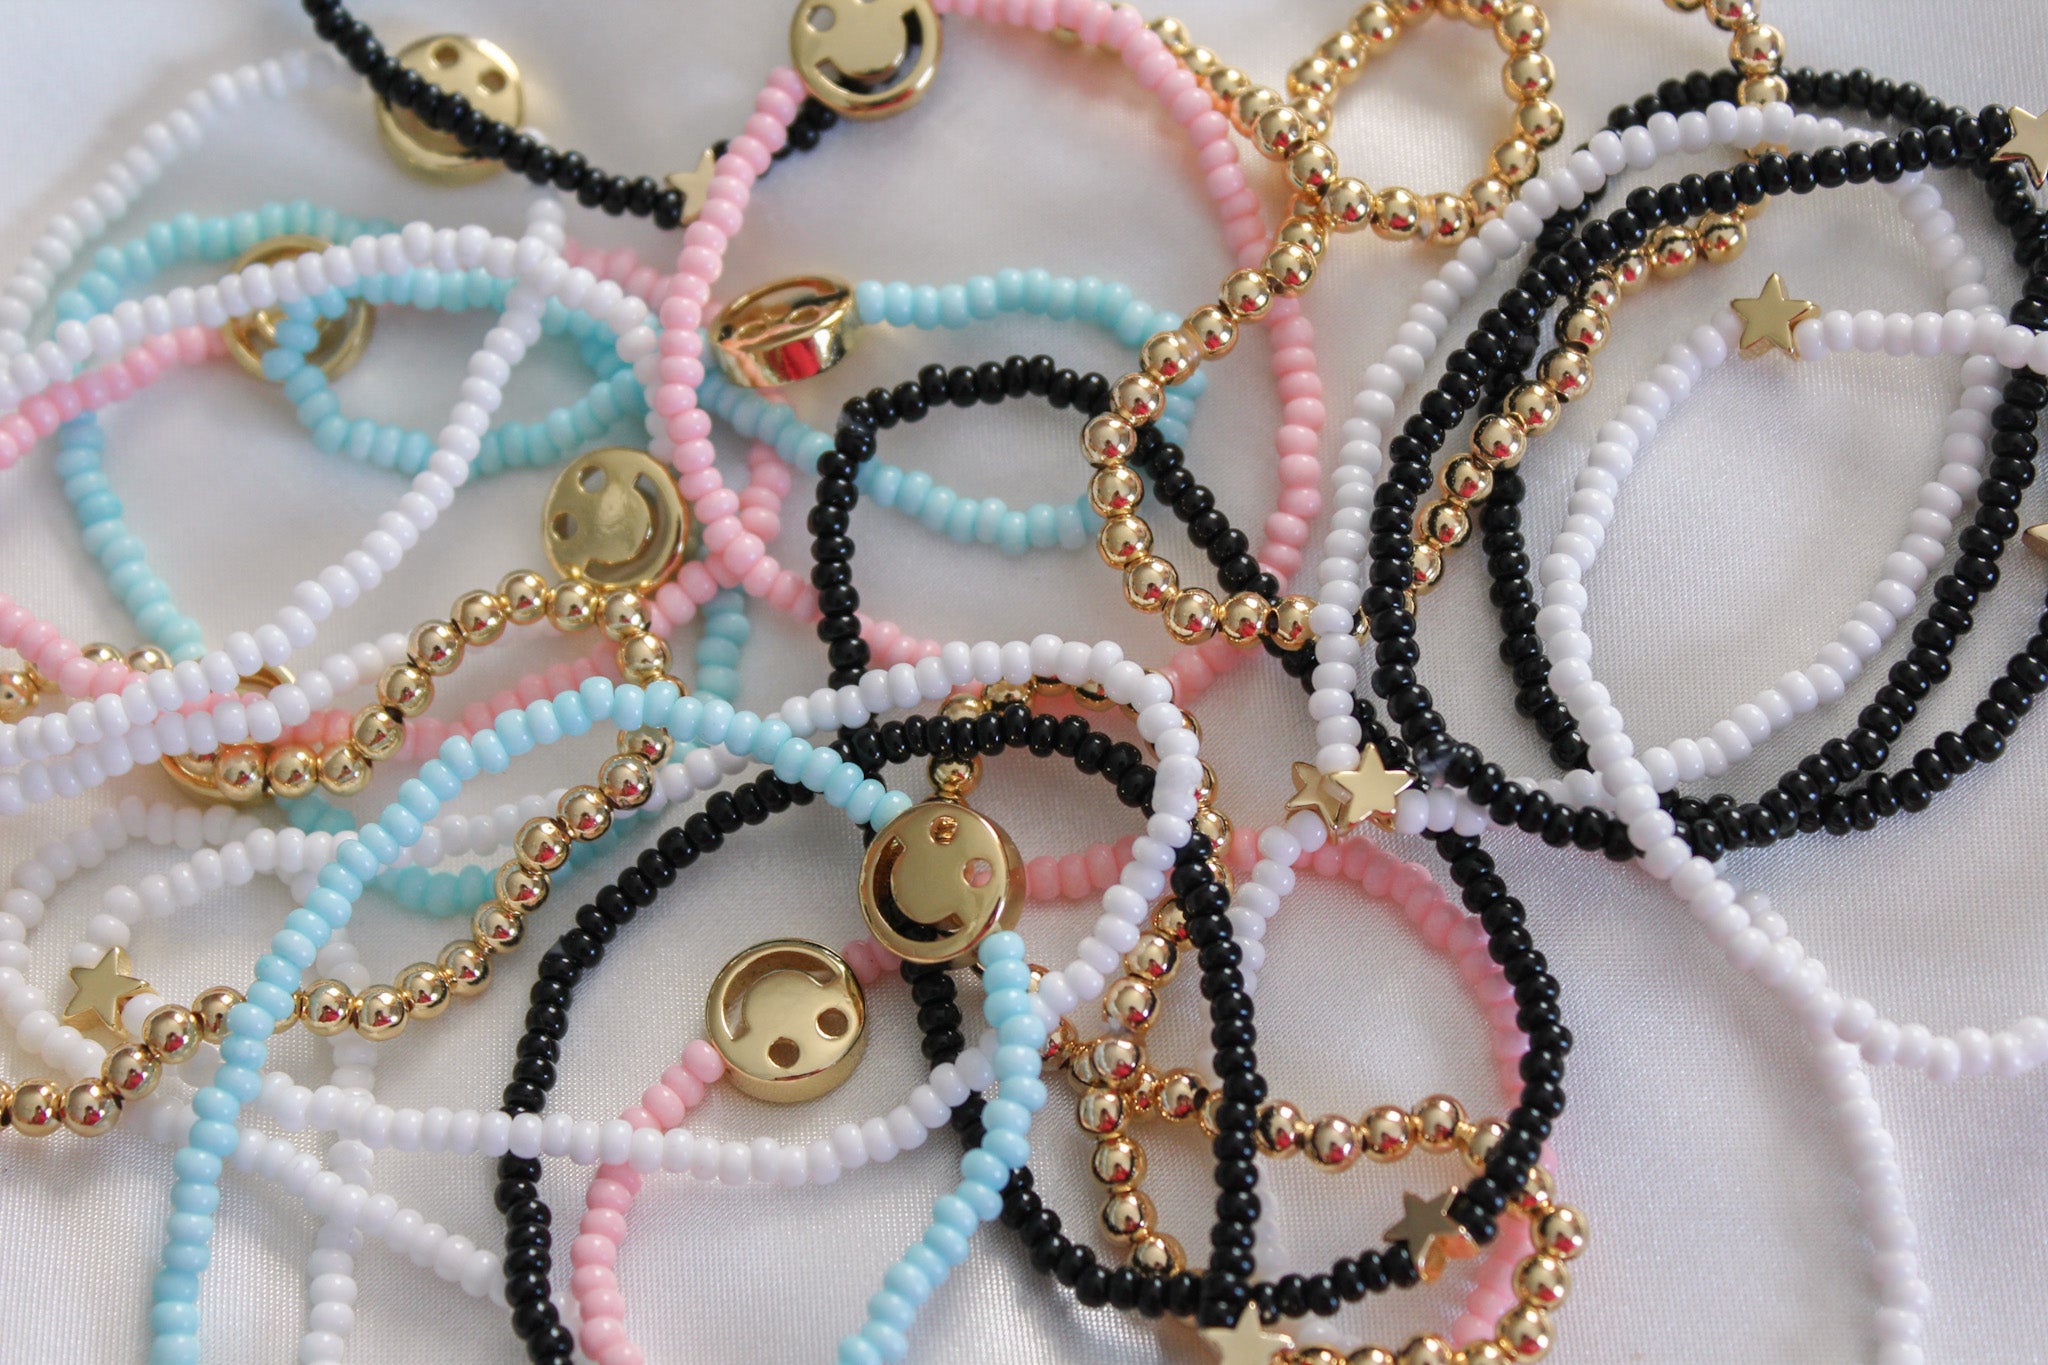 Colorful seed bead bracelets with gold smiley and star charms